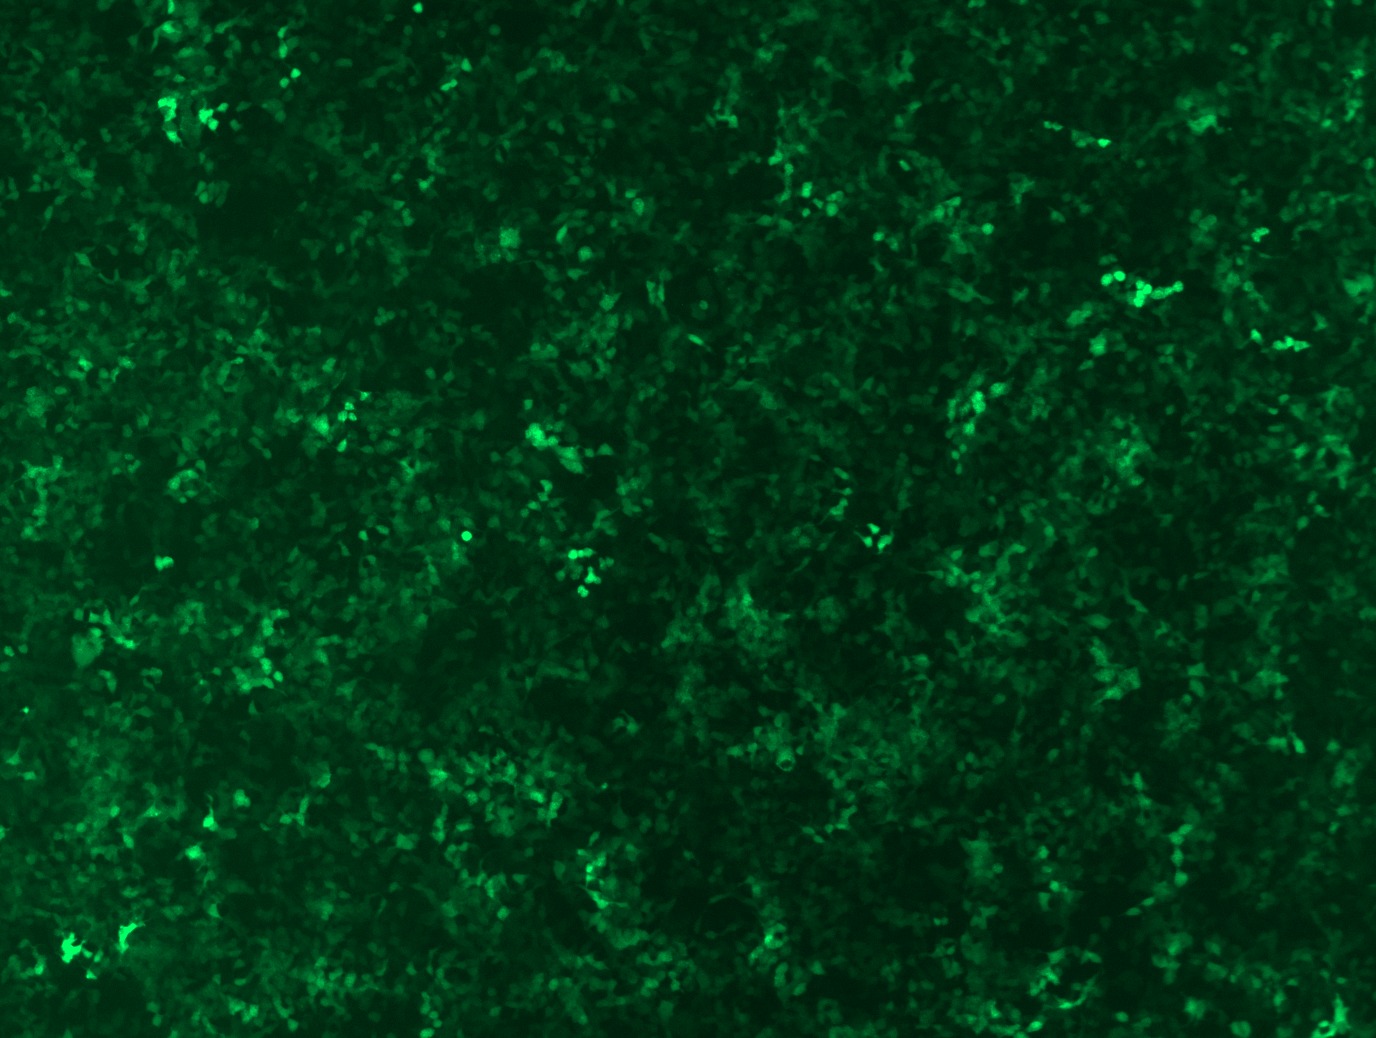 GFP signal was observed under microscope at 48 hours after transduction of TL316963A virus into HEK293 cells. TL316963A virus was prepared using lenti-shRNA TL316963A and TR30037 packaging kit.